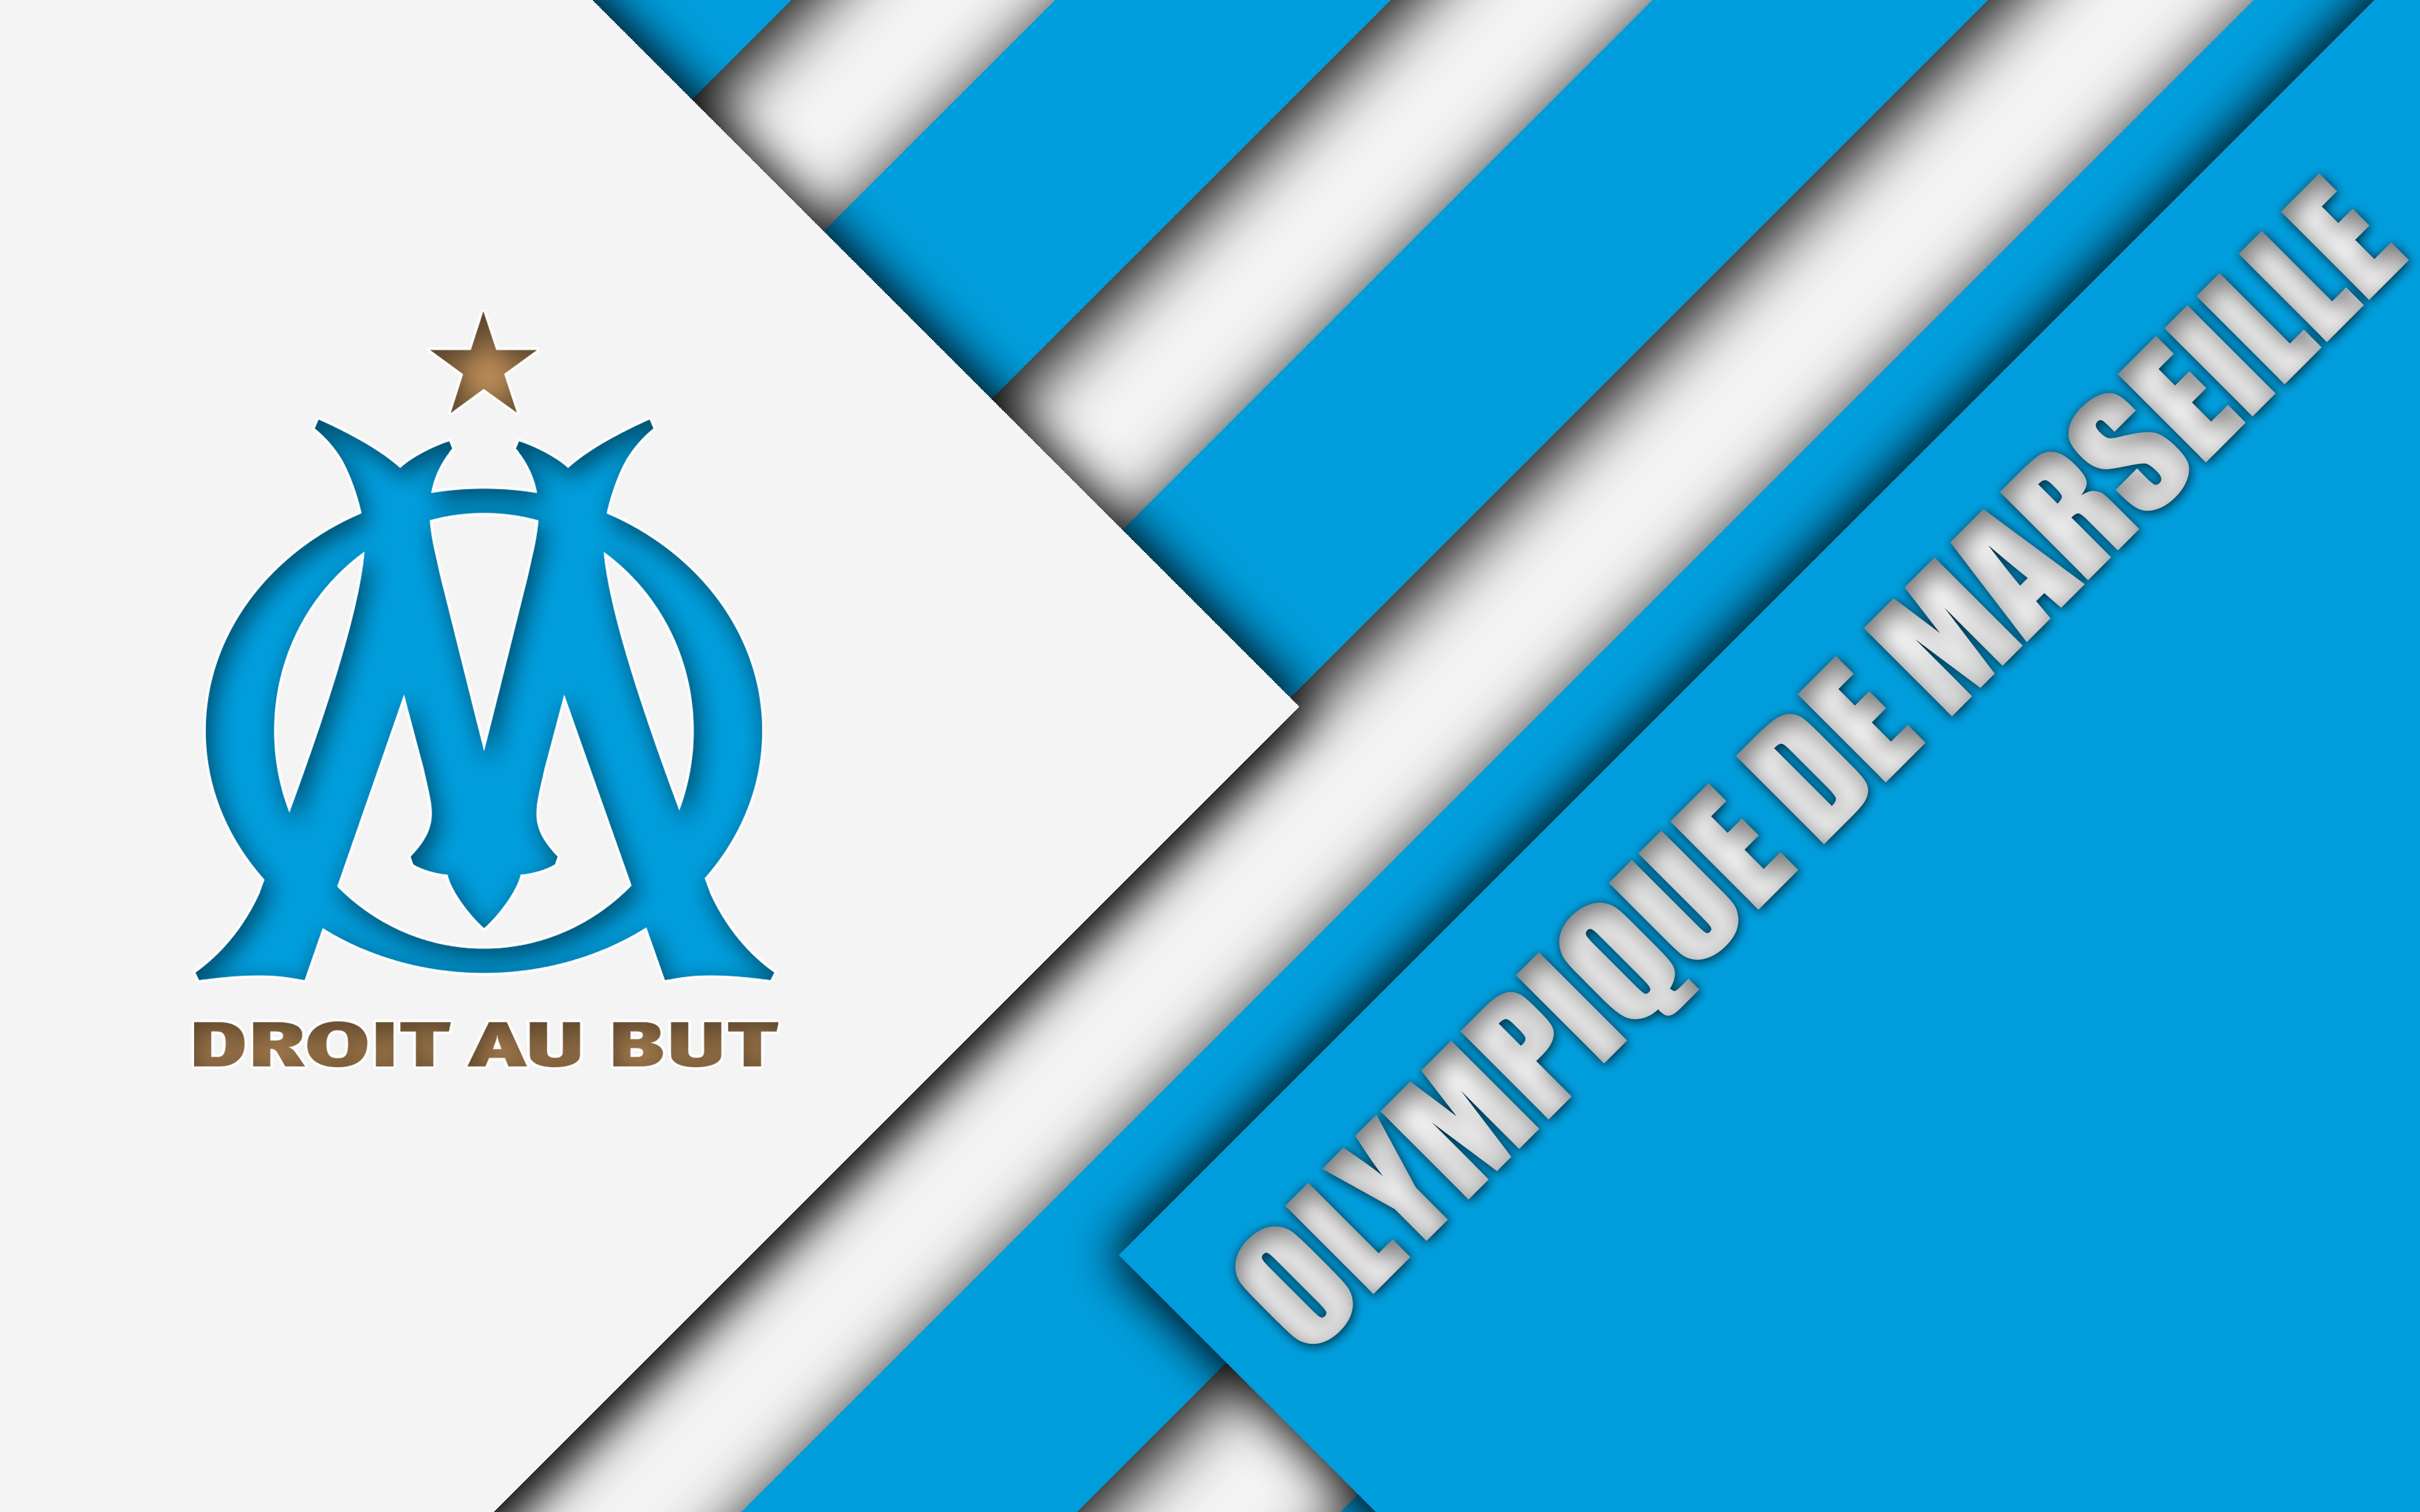 Olympique de Marseille phone wallpaper 1080P 2k 4k Full HD Wallpapers  Backgrounds Free Download  Wallpaper Crafter